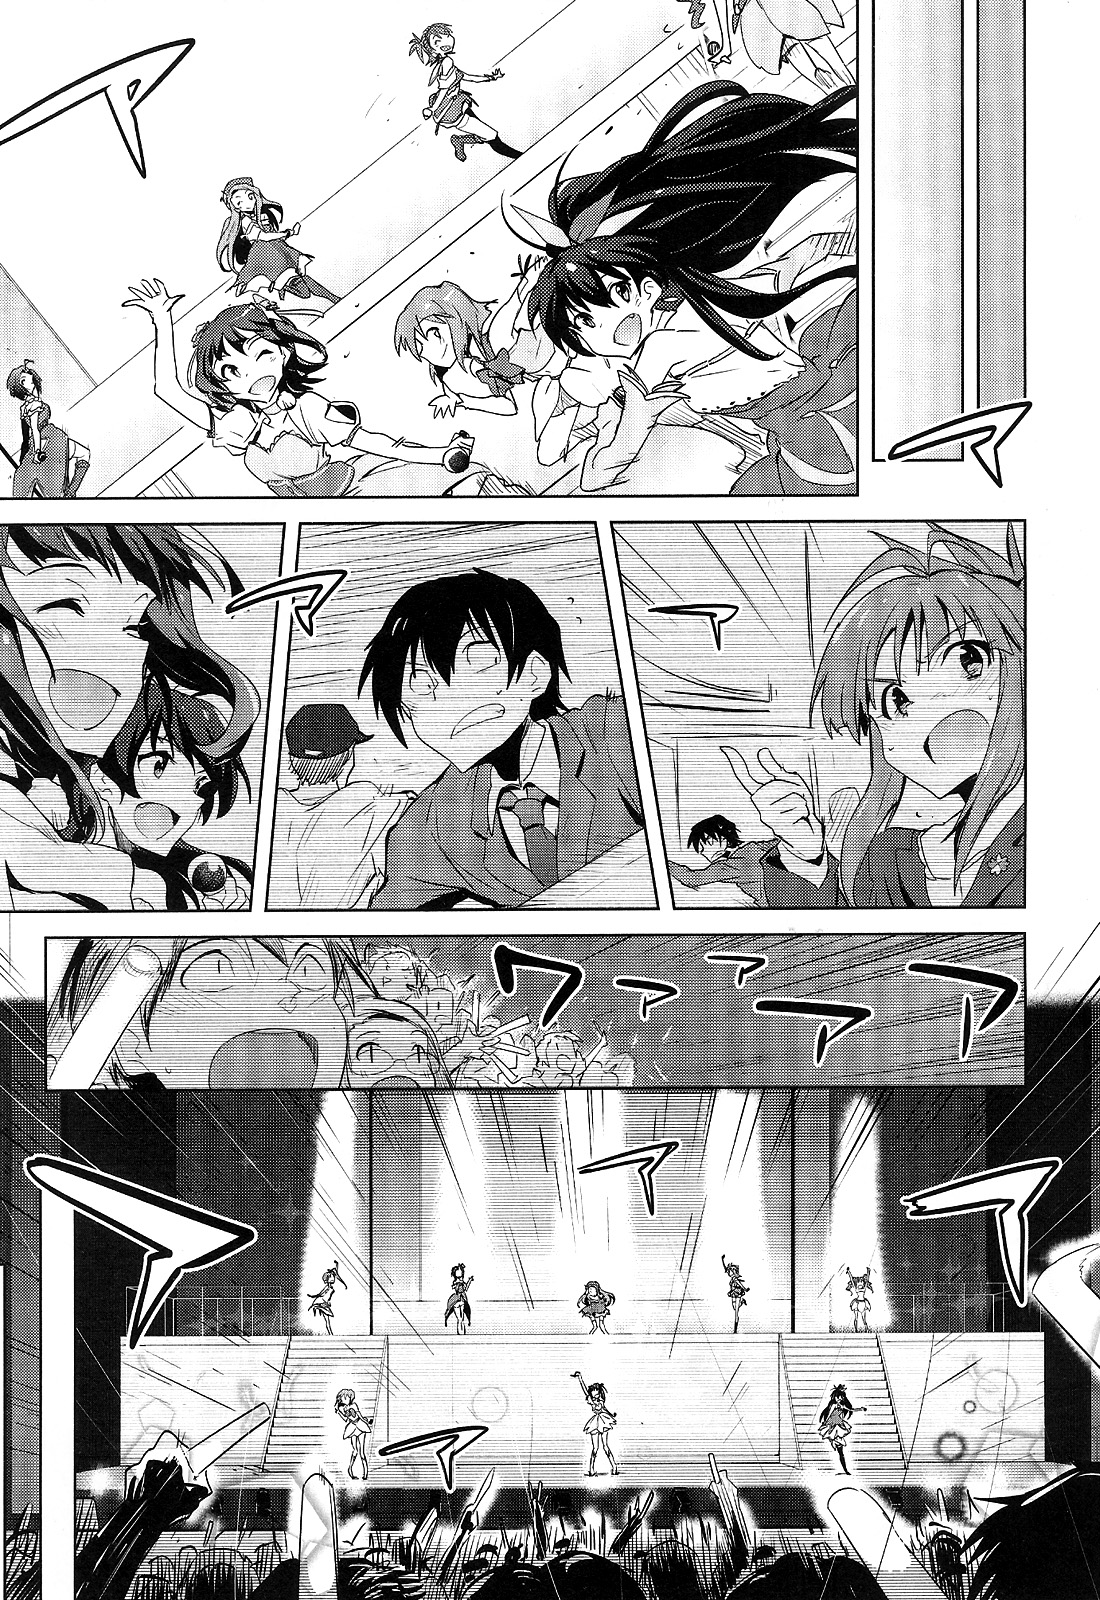 THE iDOLM@STER 2 The world is all one!! Vol. 2 Ch. 8 Day of Epiphany